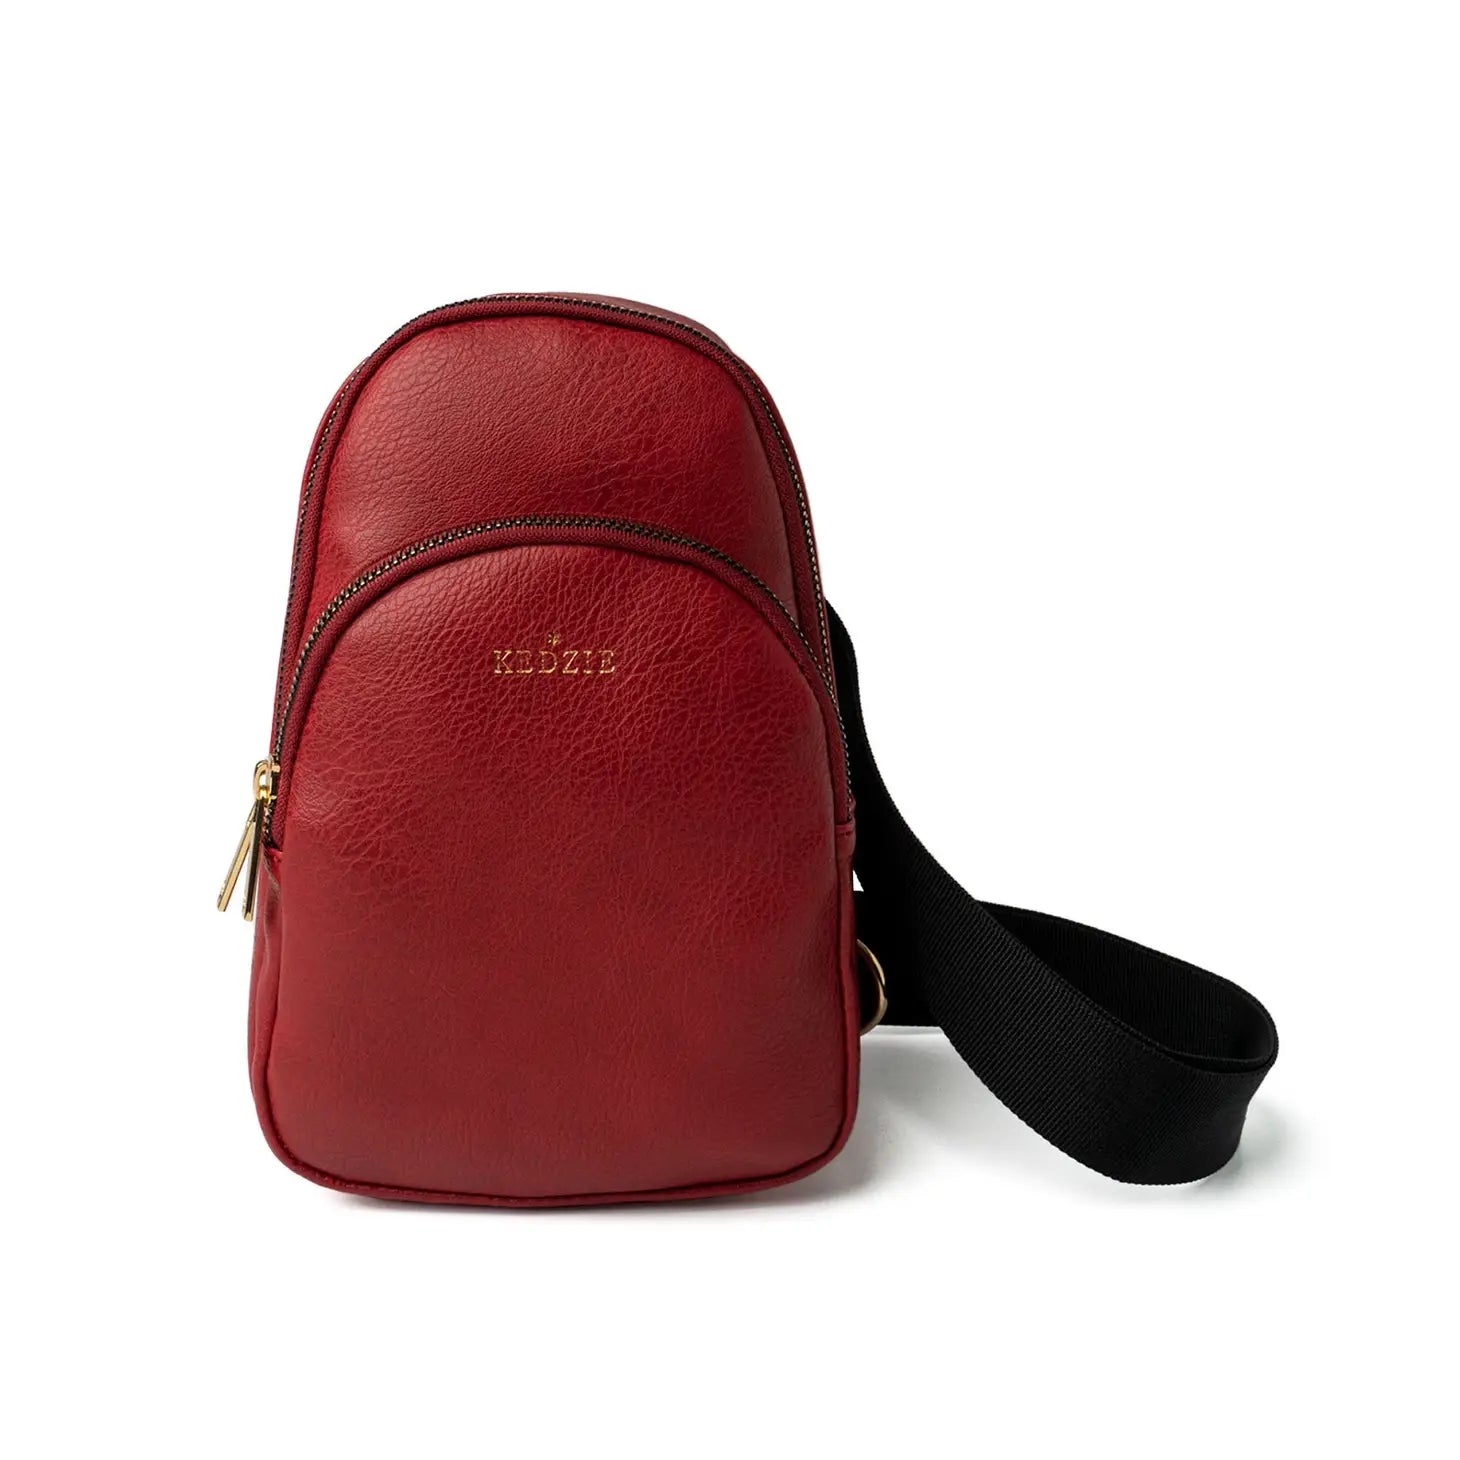 Brand New Never Used Red in Color Sling Bag. - clothing & accessories - by  owner - apparel sale - craigslist